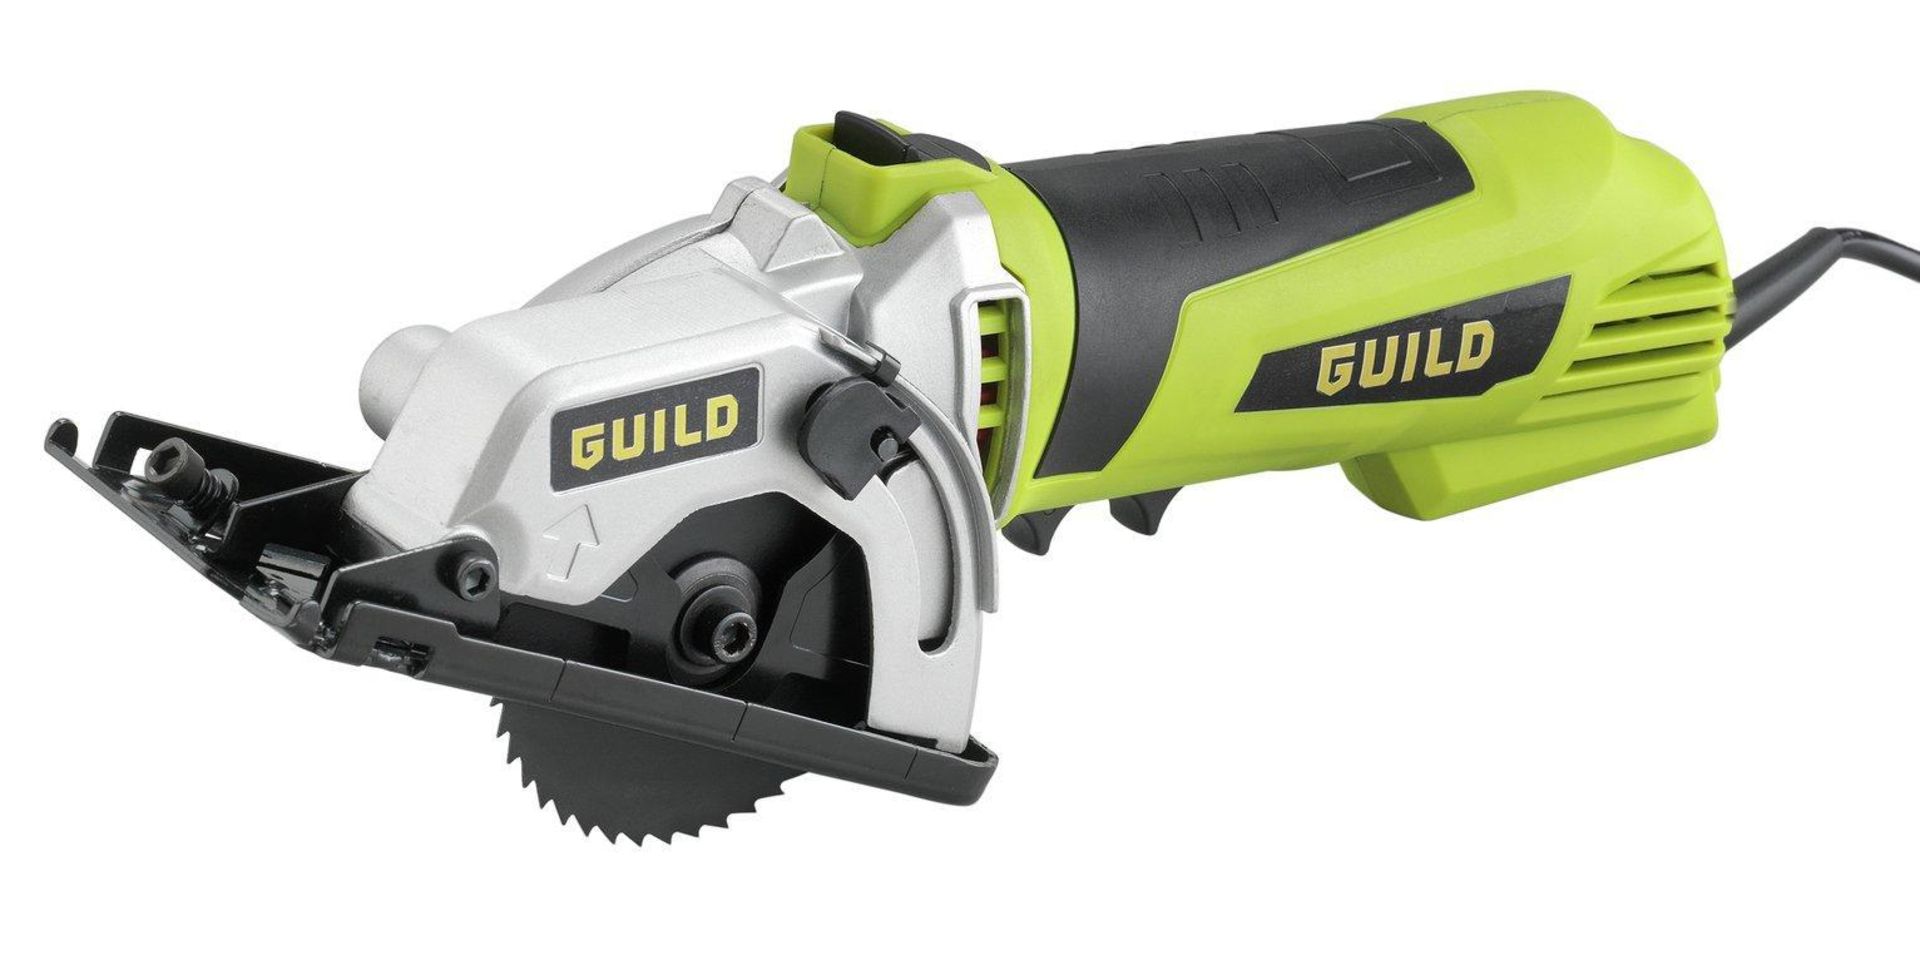 Guild 85mm Compact Plunge Saw - 500W, £50.00 RRP